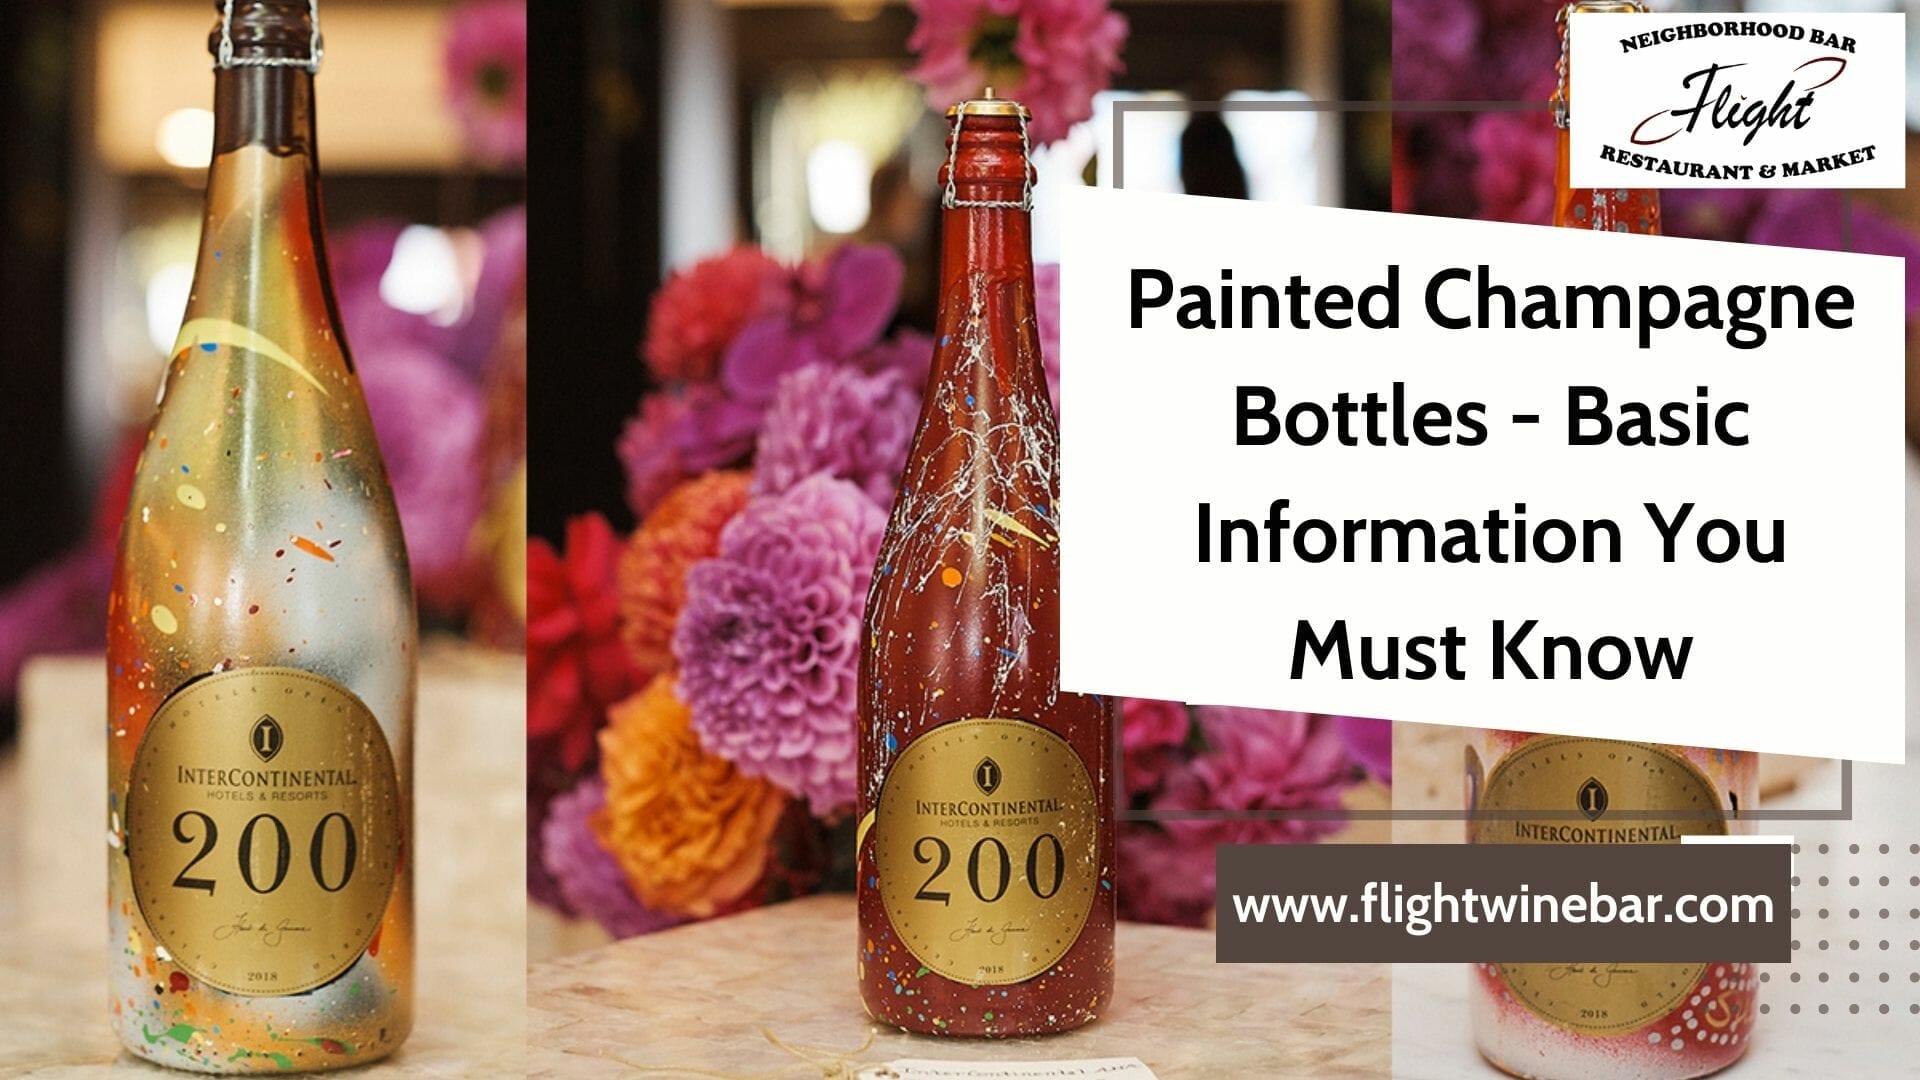 Painted Champagne Bottles